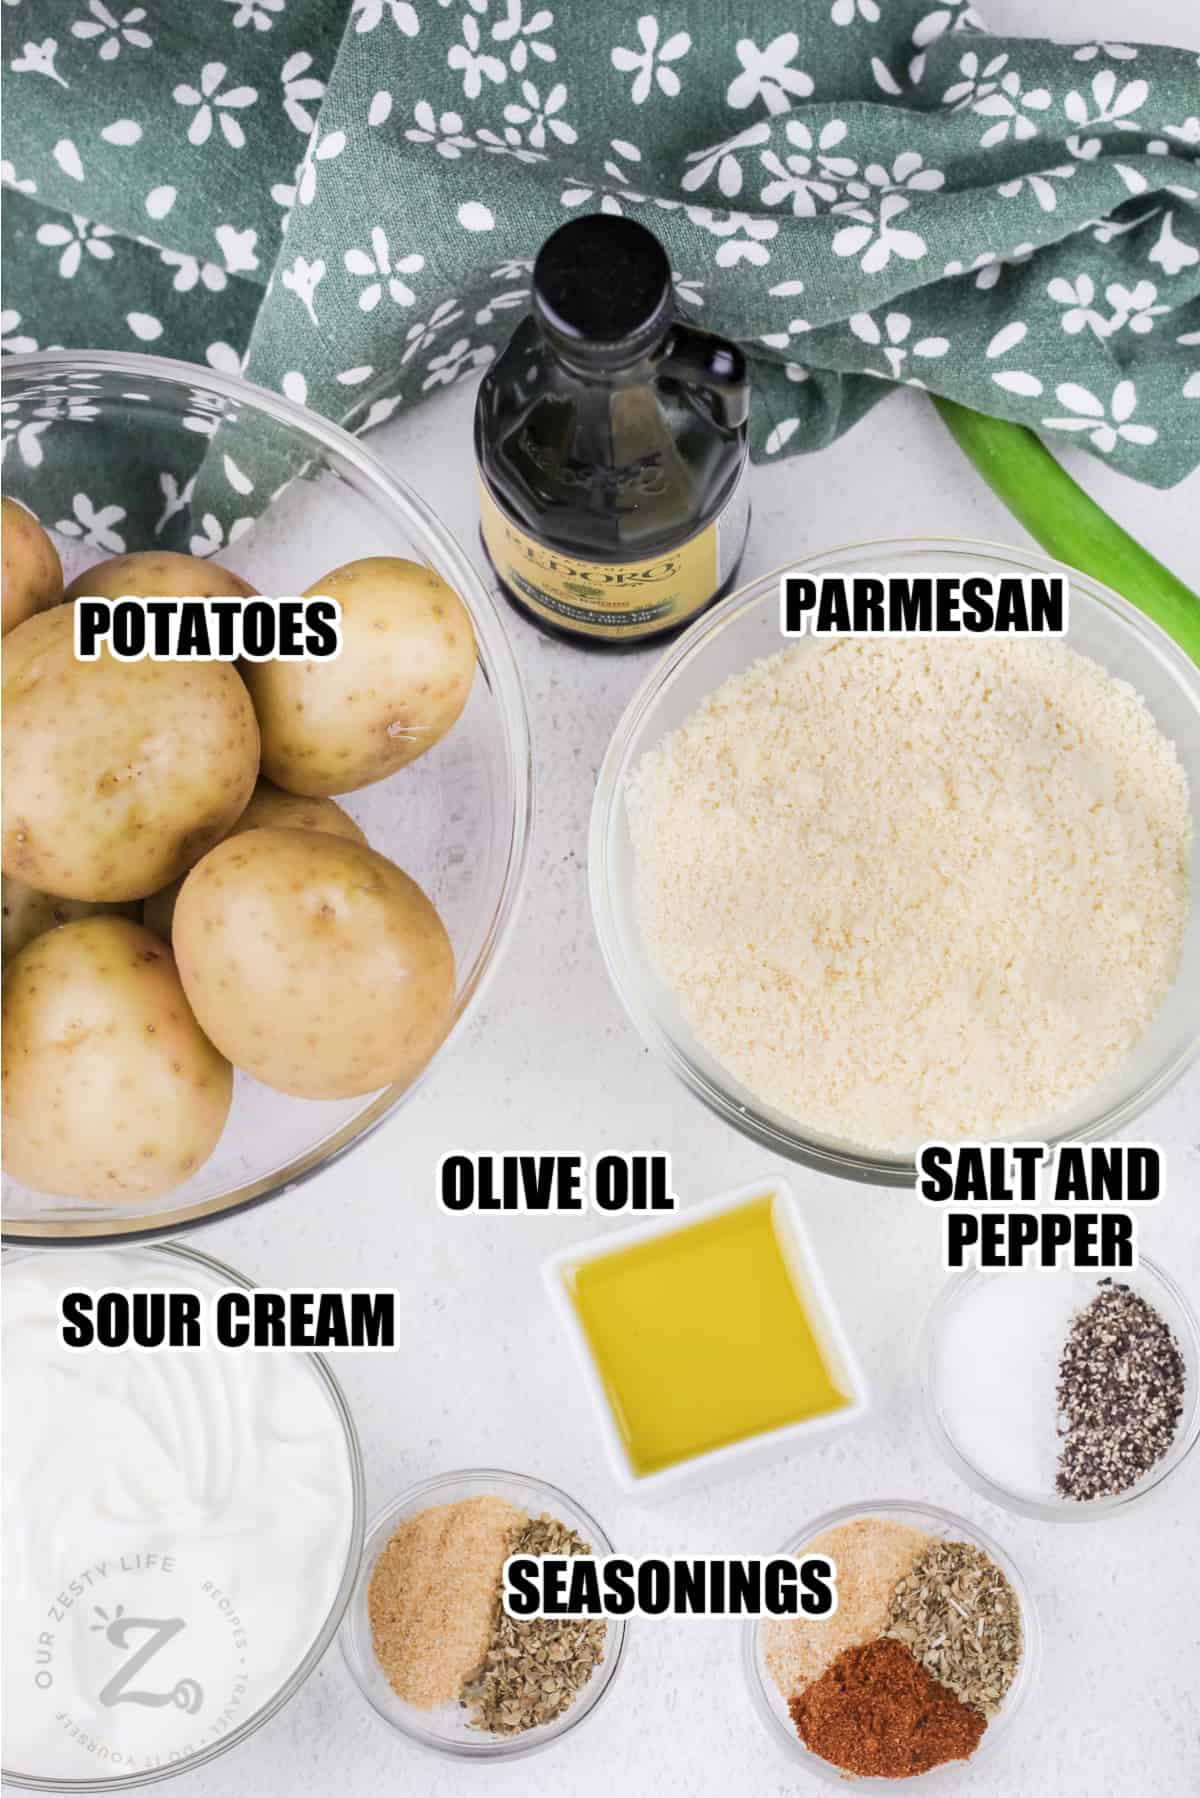 ingredients for Parmesan Roasted Potatoes including parmesan, potatoes, olive oil, salt and pepper, sour cream, and other seasonings